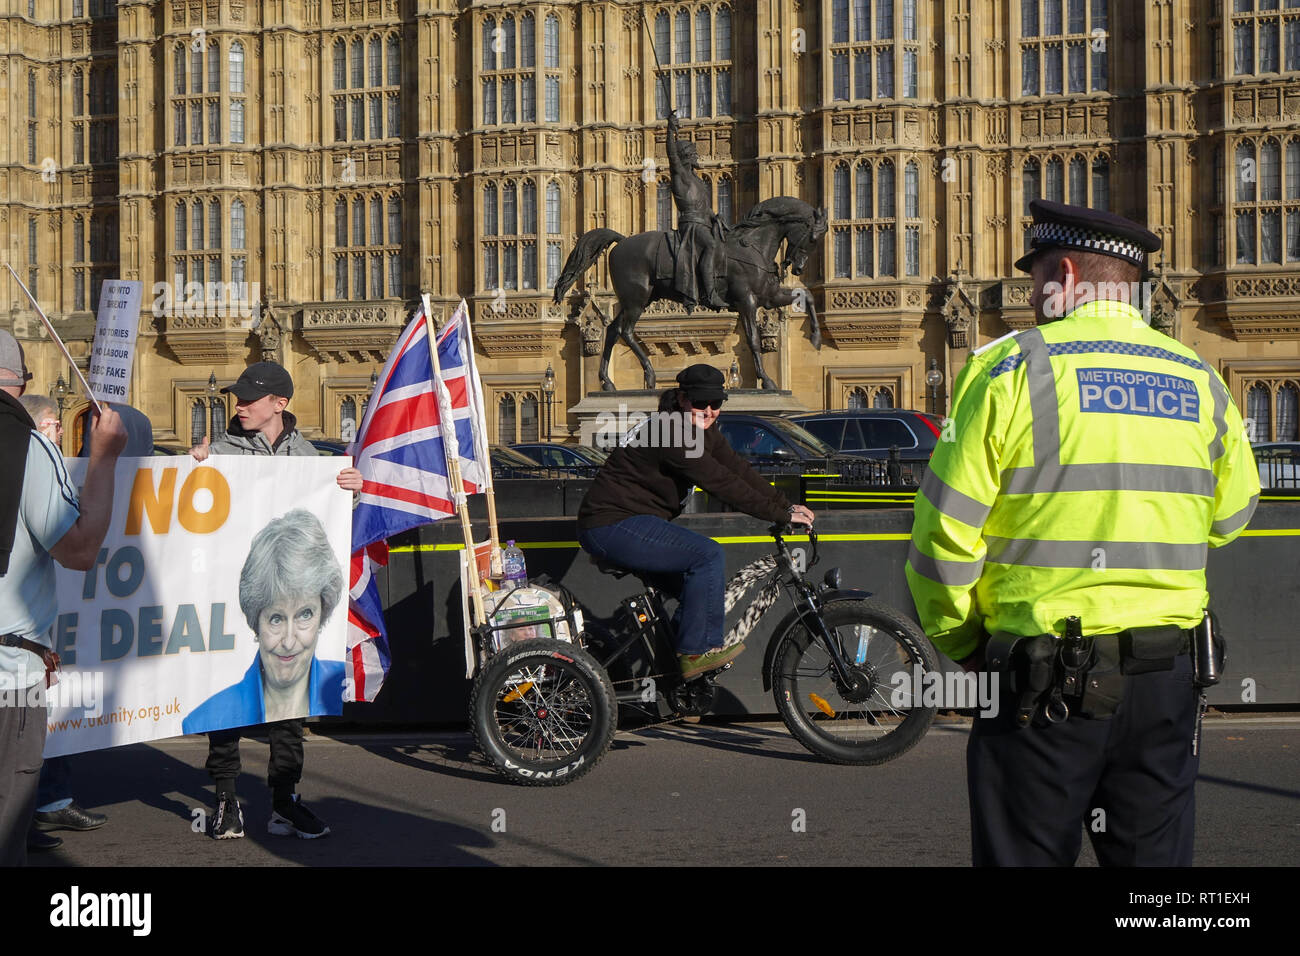 London, UK. 27th Feb, 2019. Pro-Brexit Activists demonstrate opposite Palace Of Westminster in London Credit: Thomas Krych/Alamy Live News Stock Photo